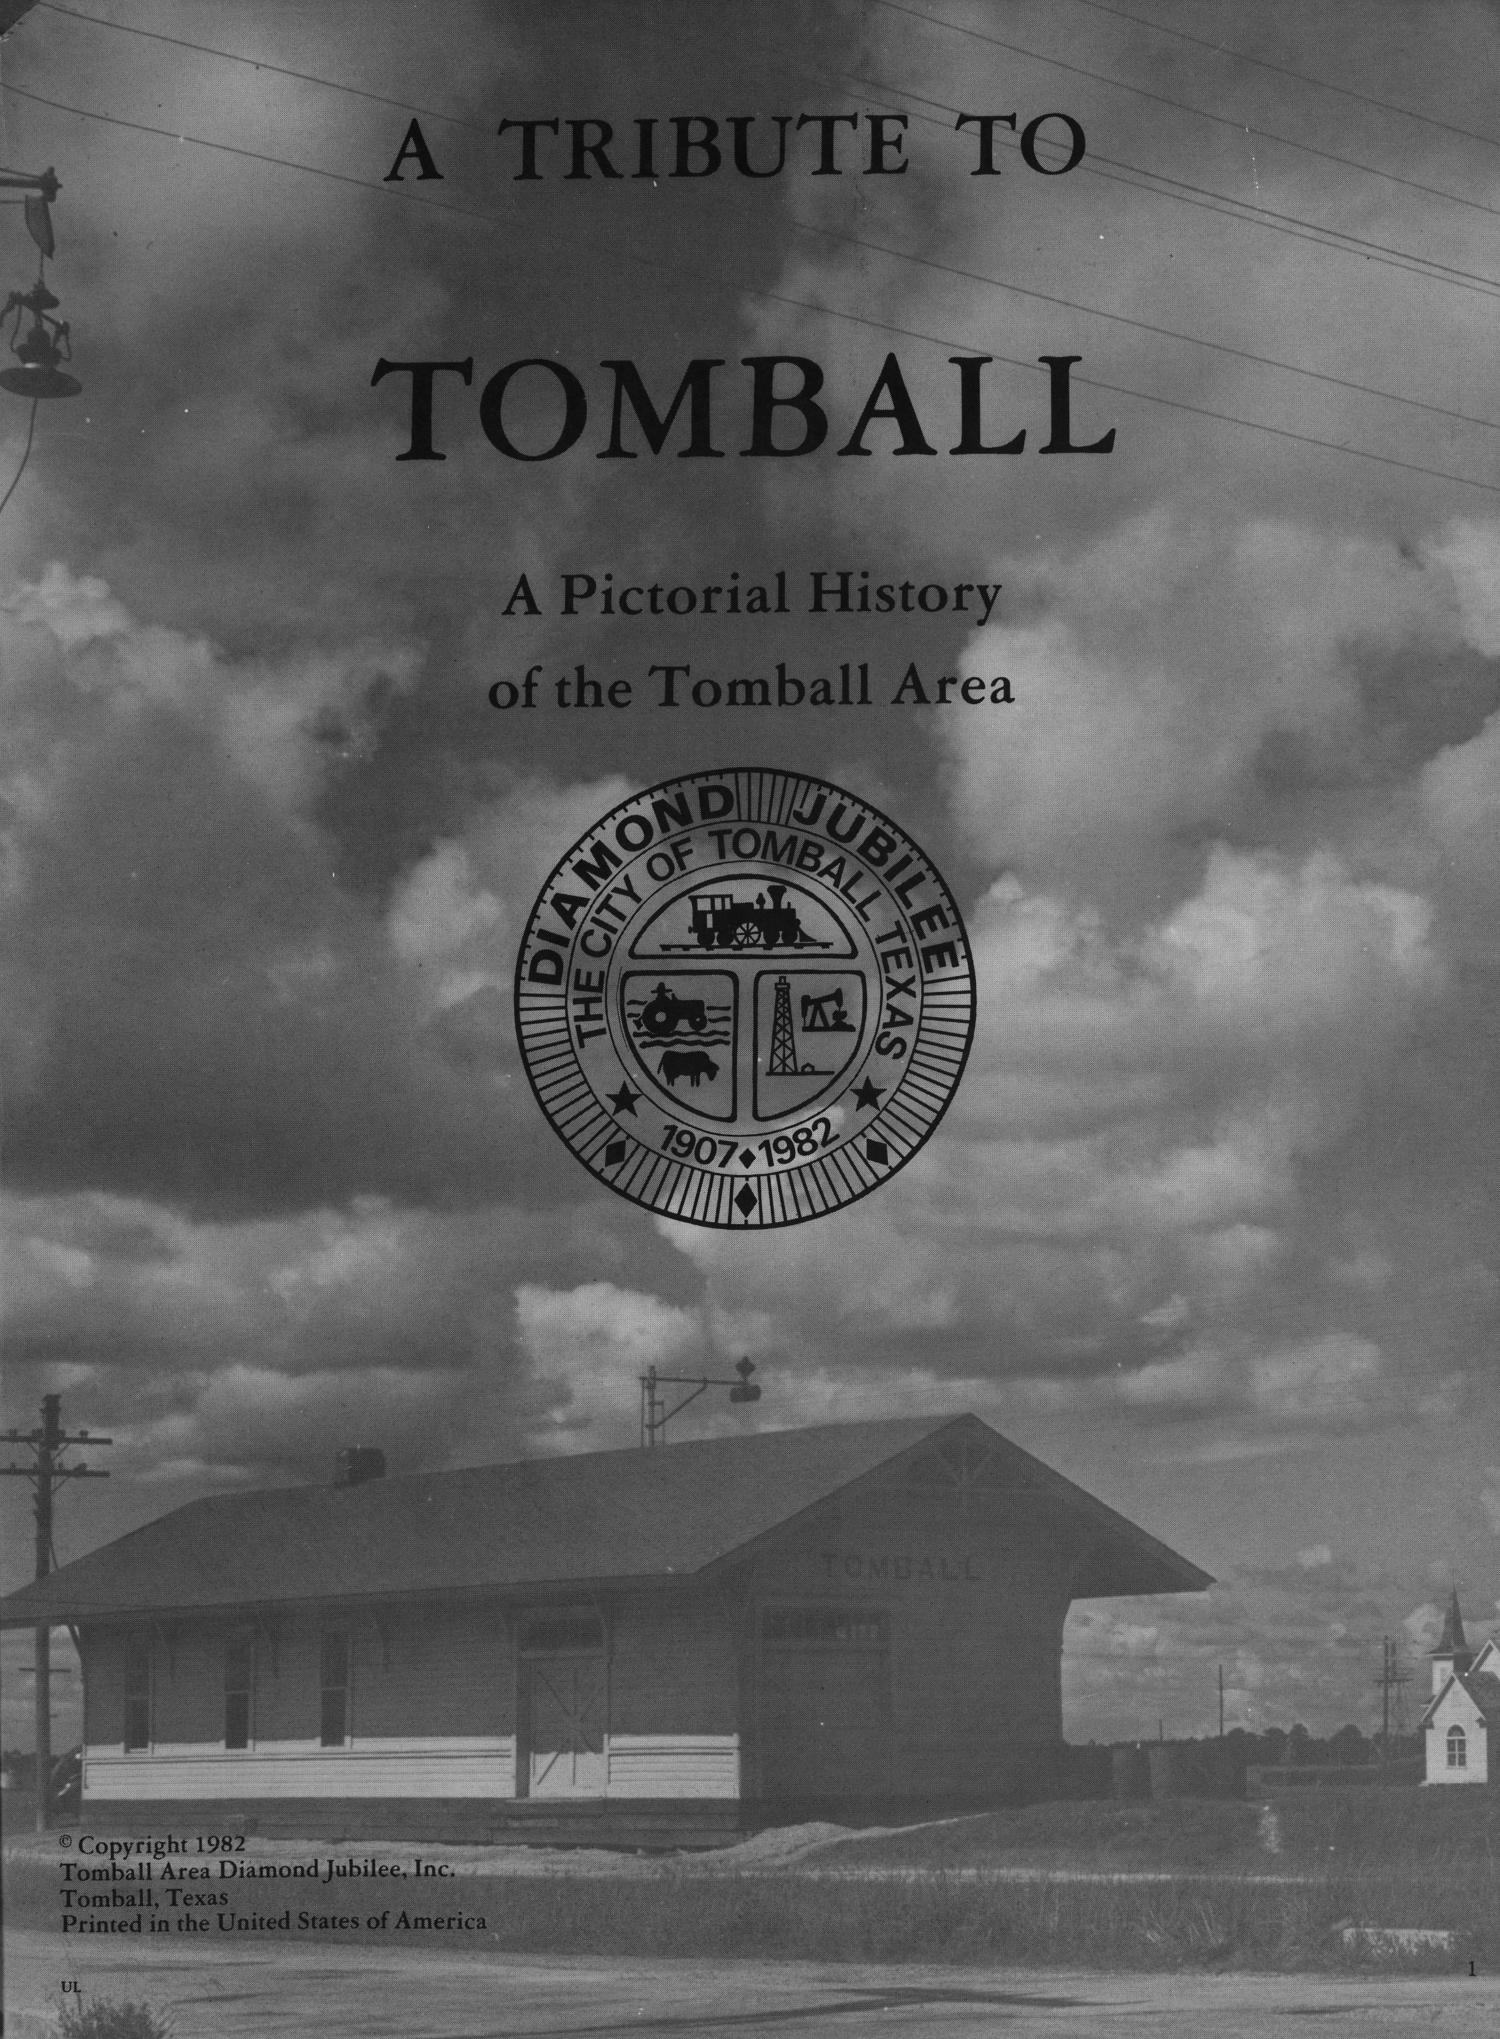 A Tribute to Tomball: A Pictorial History of the Tomball Area
                                                
                                                    Title Page
                                                